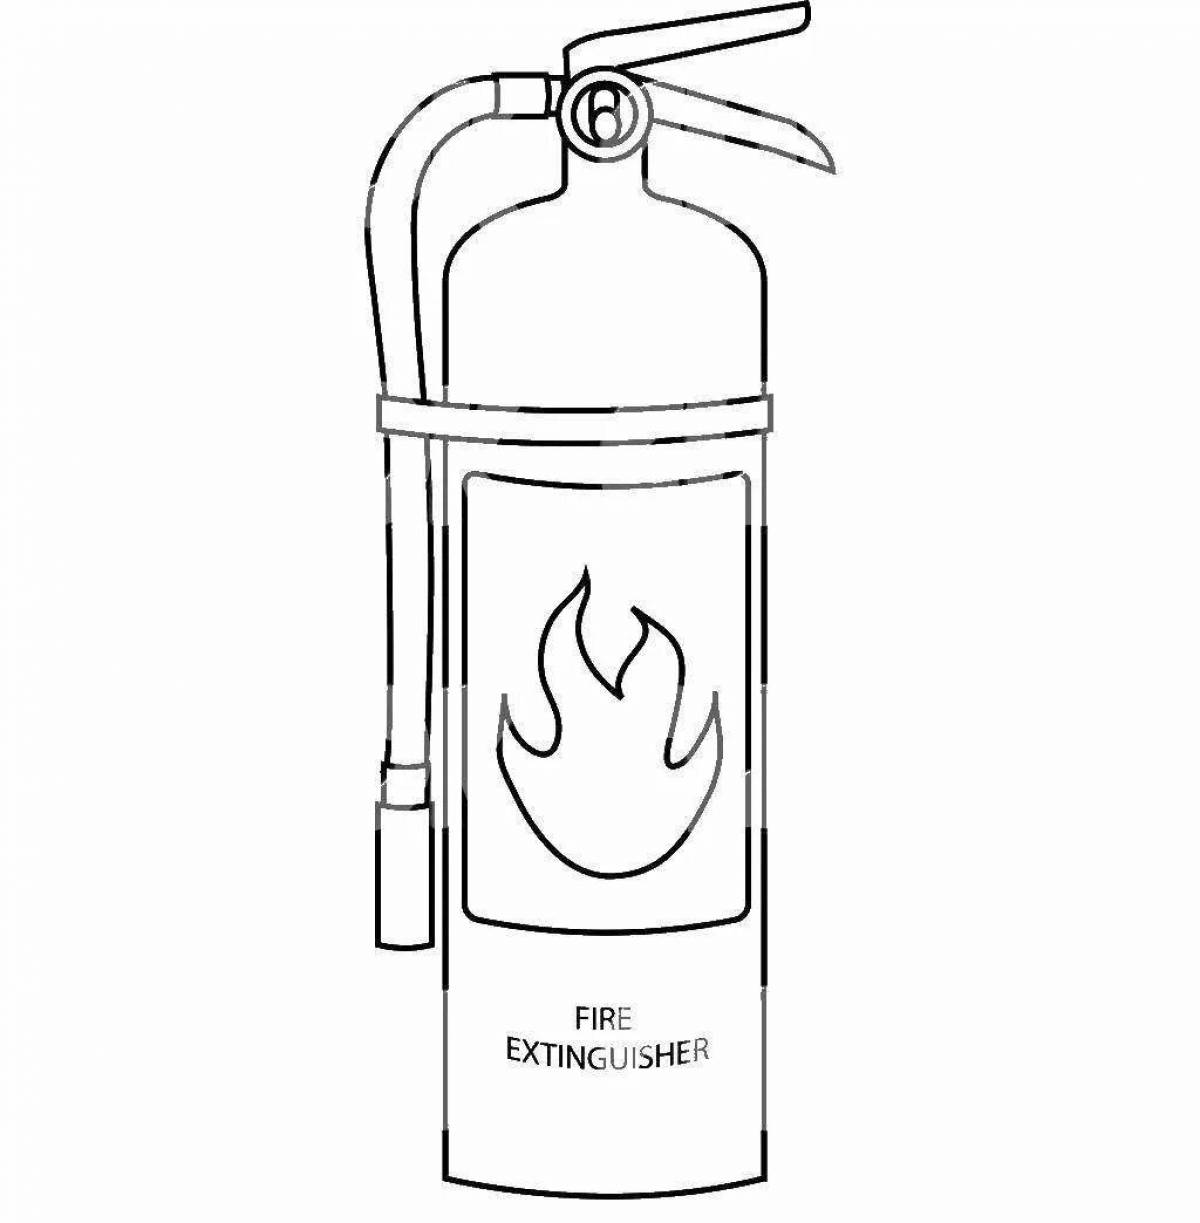 Coloring book fire extinguisher for children 5-6 years old